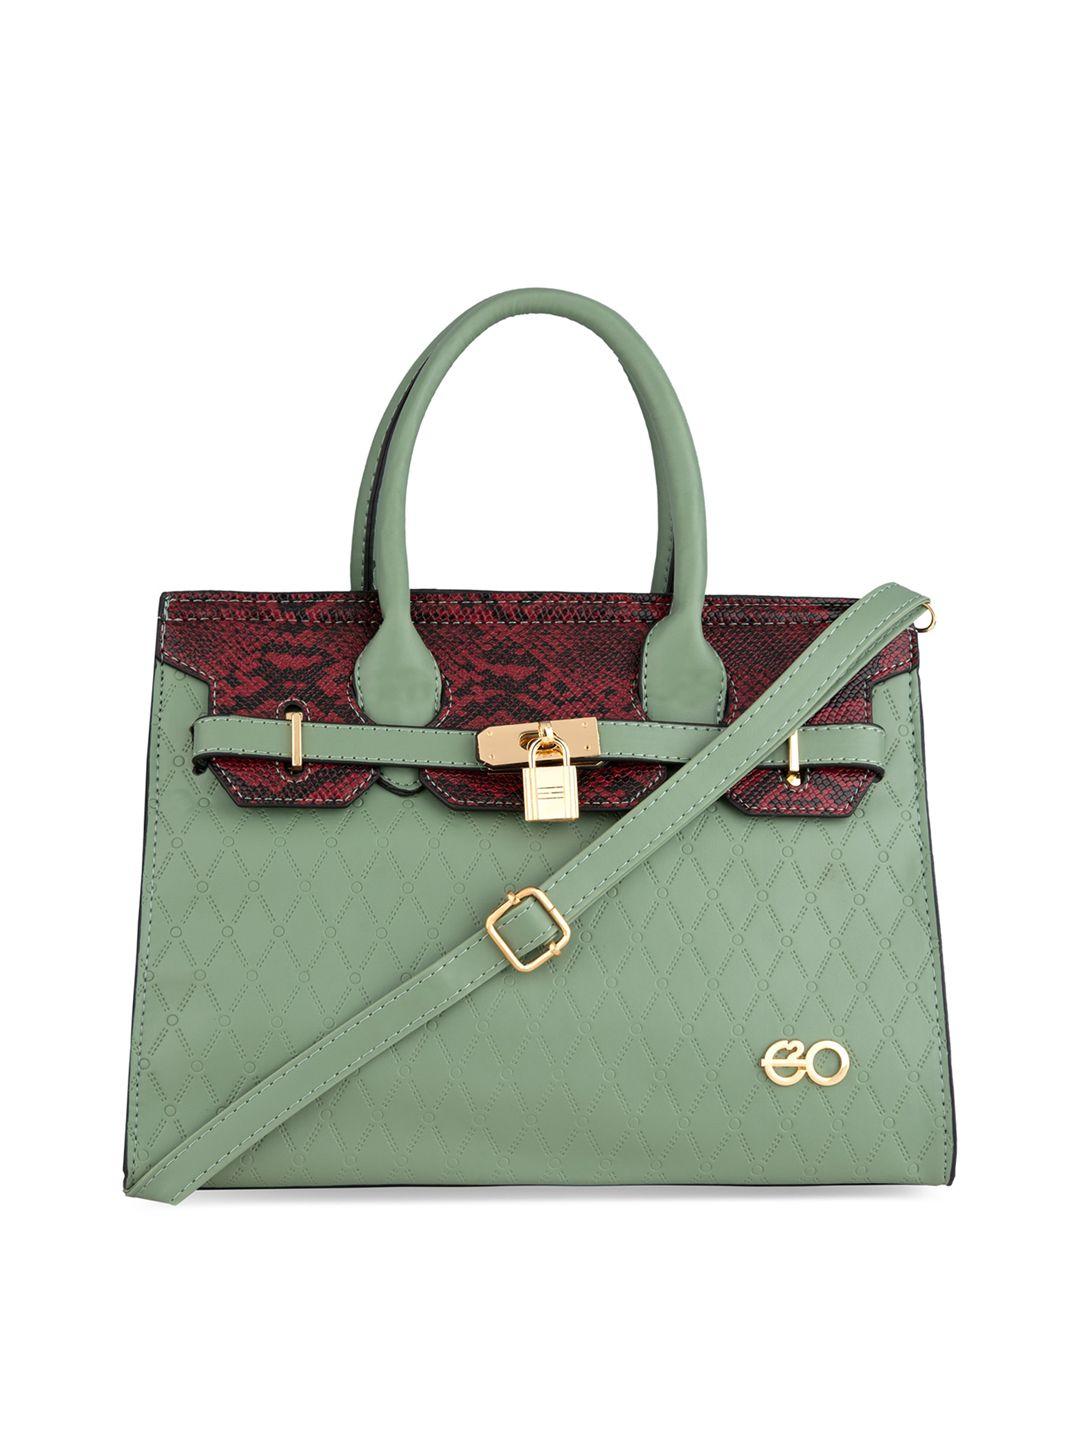 e2o green colourblocked pu swagger handheld bag with bow detail